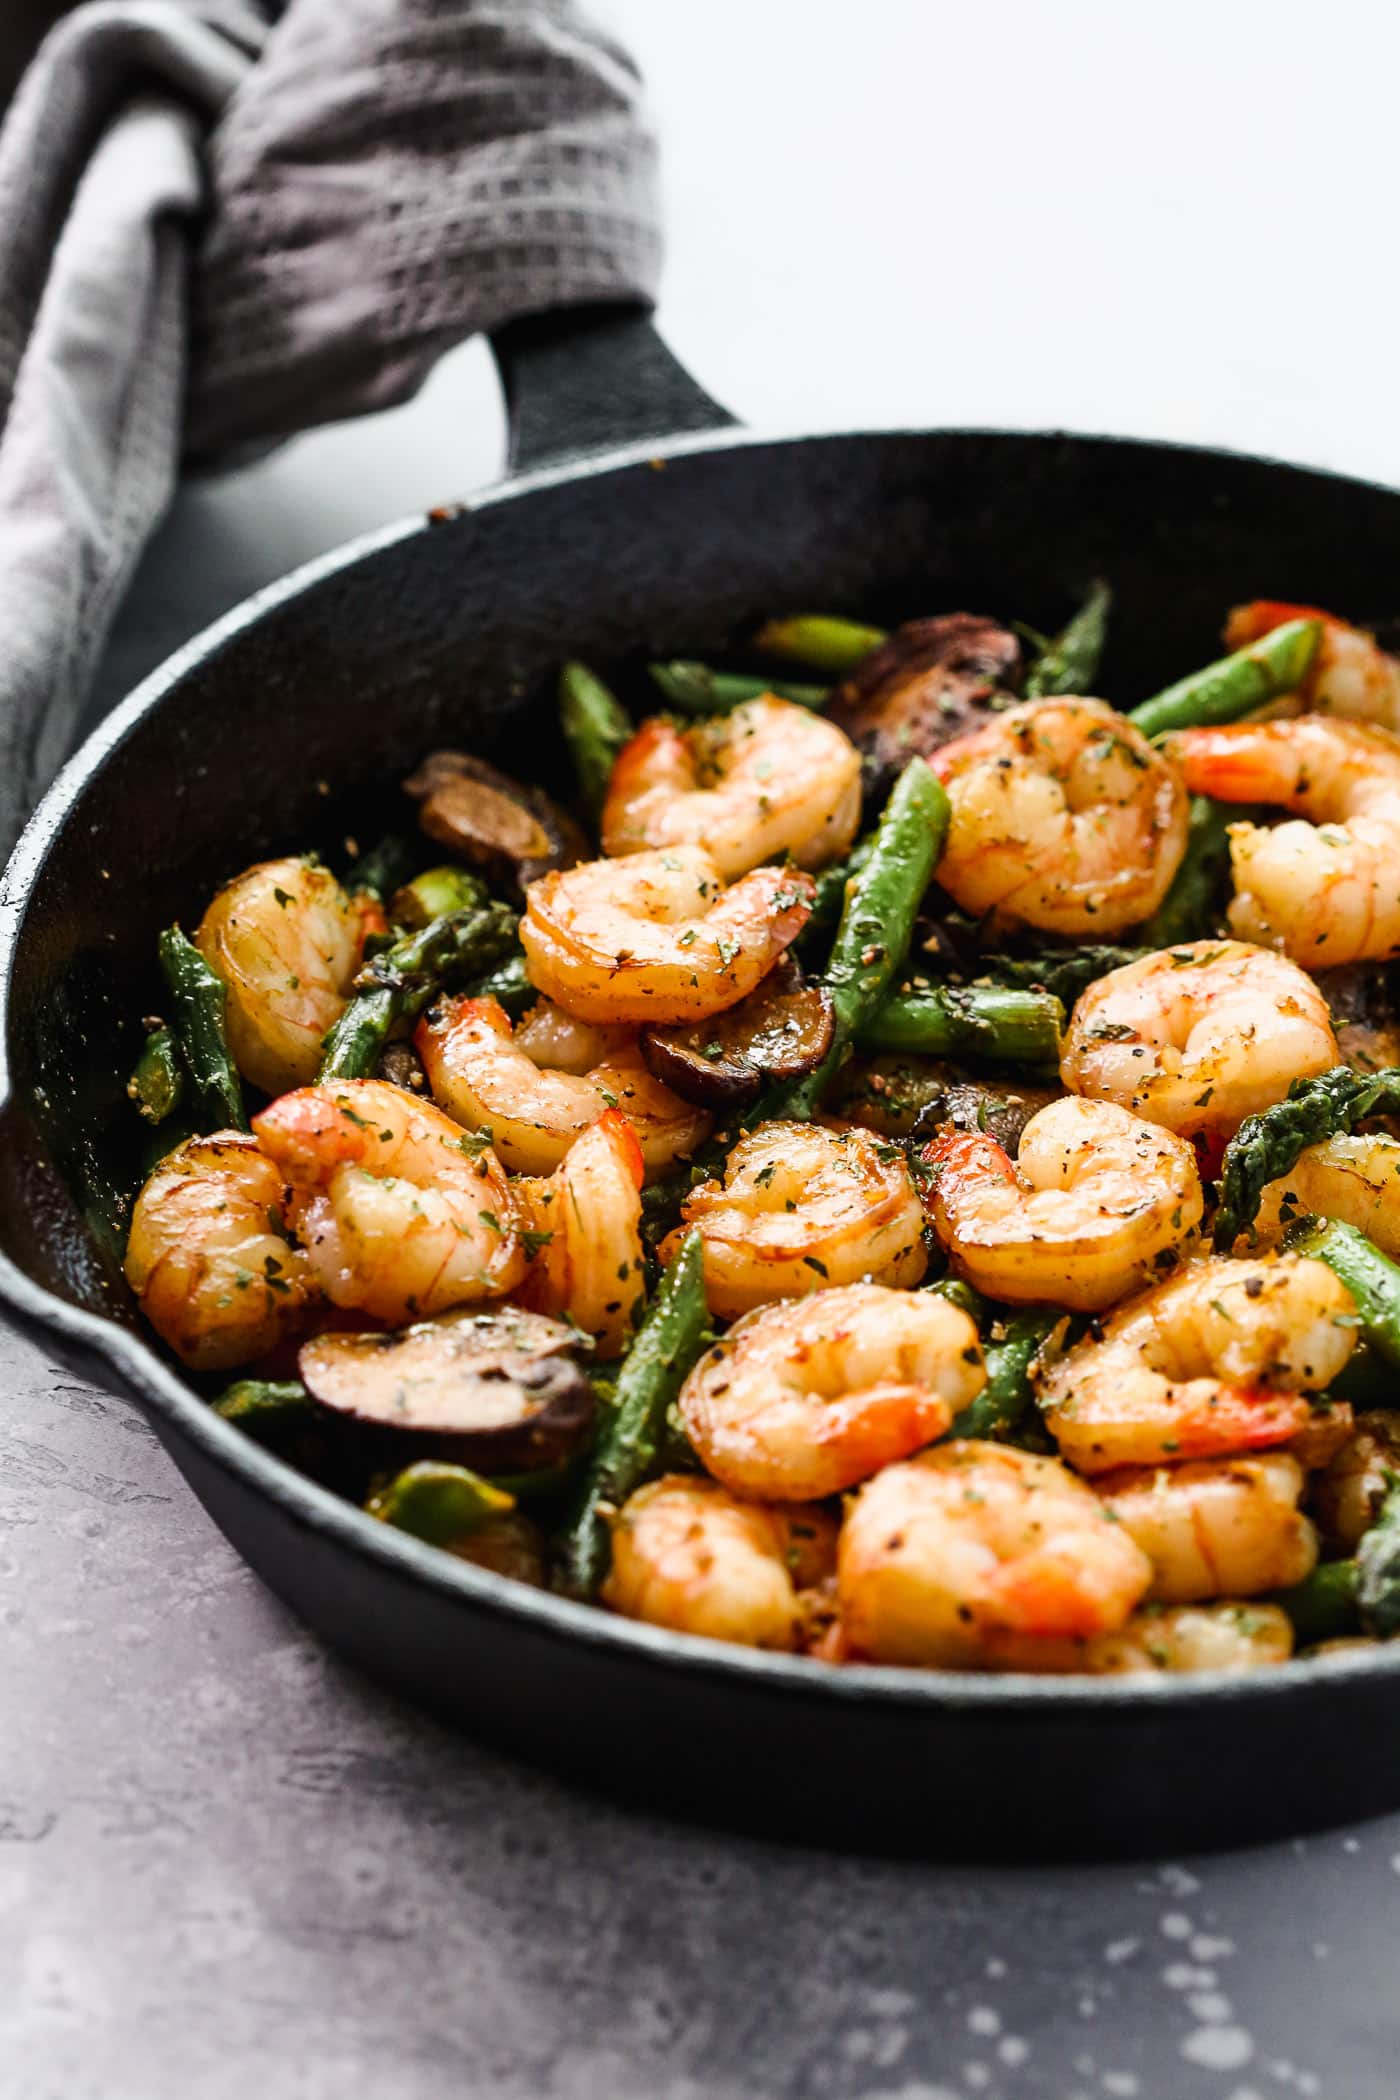 Sauteed shrimp, asparagus and mushrooms in a skillet.